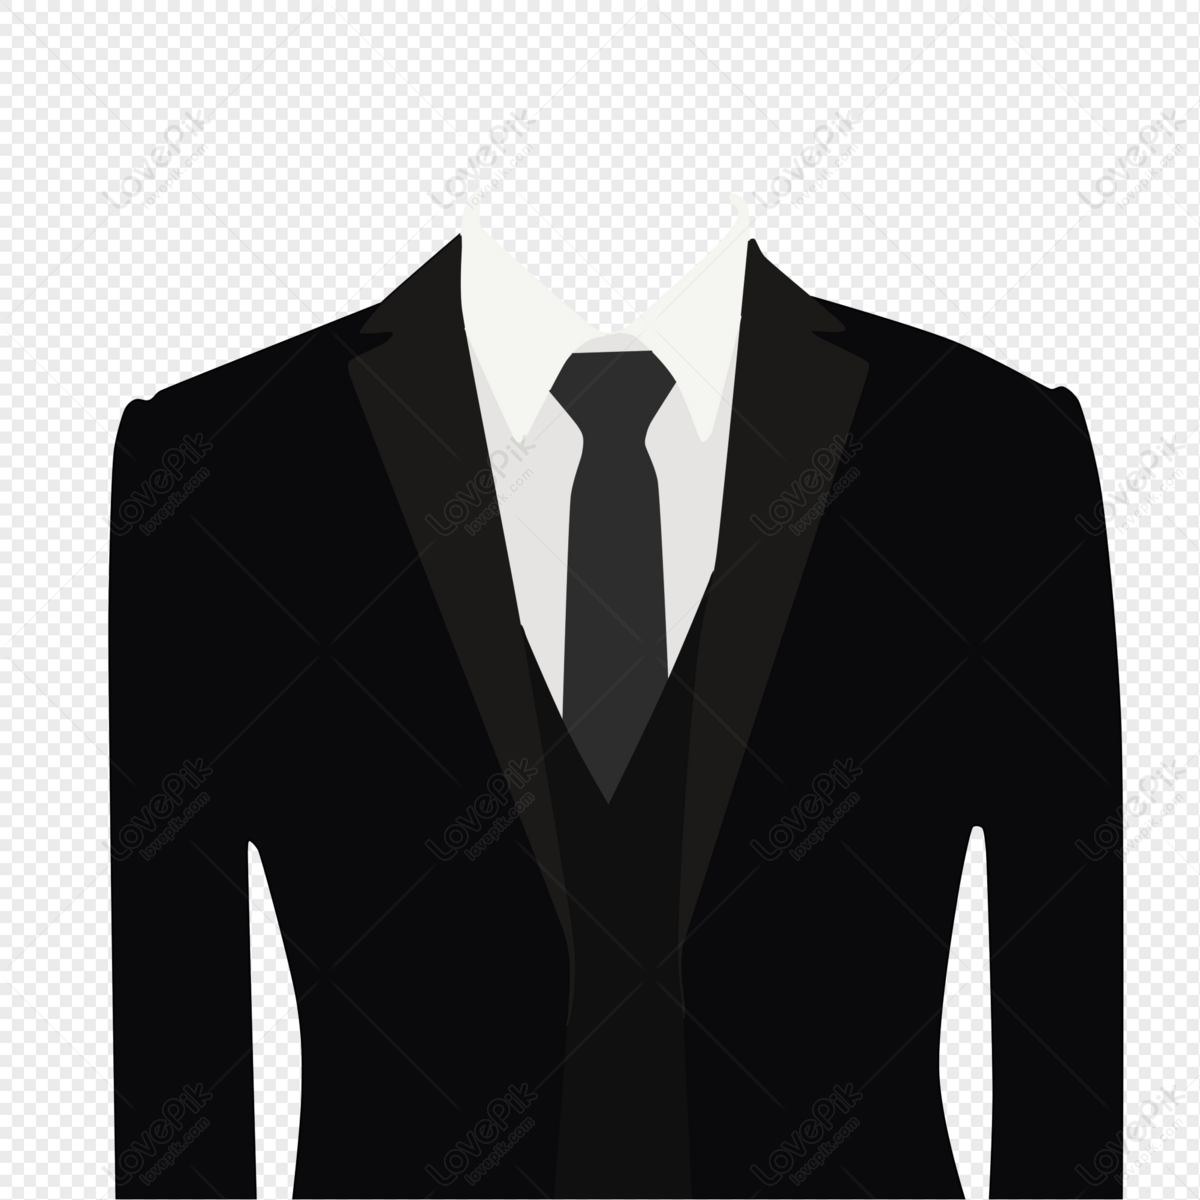 Suit Free White Transparent, Free Cartoon Black Suit, Colorful Tie, White  Shirt, Yellow Suit PNG Image For Free Download